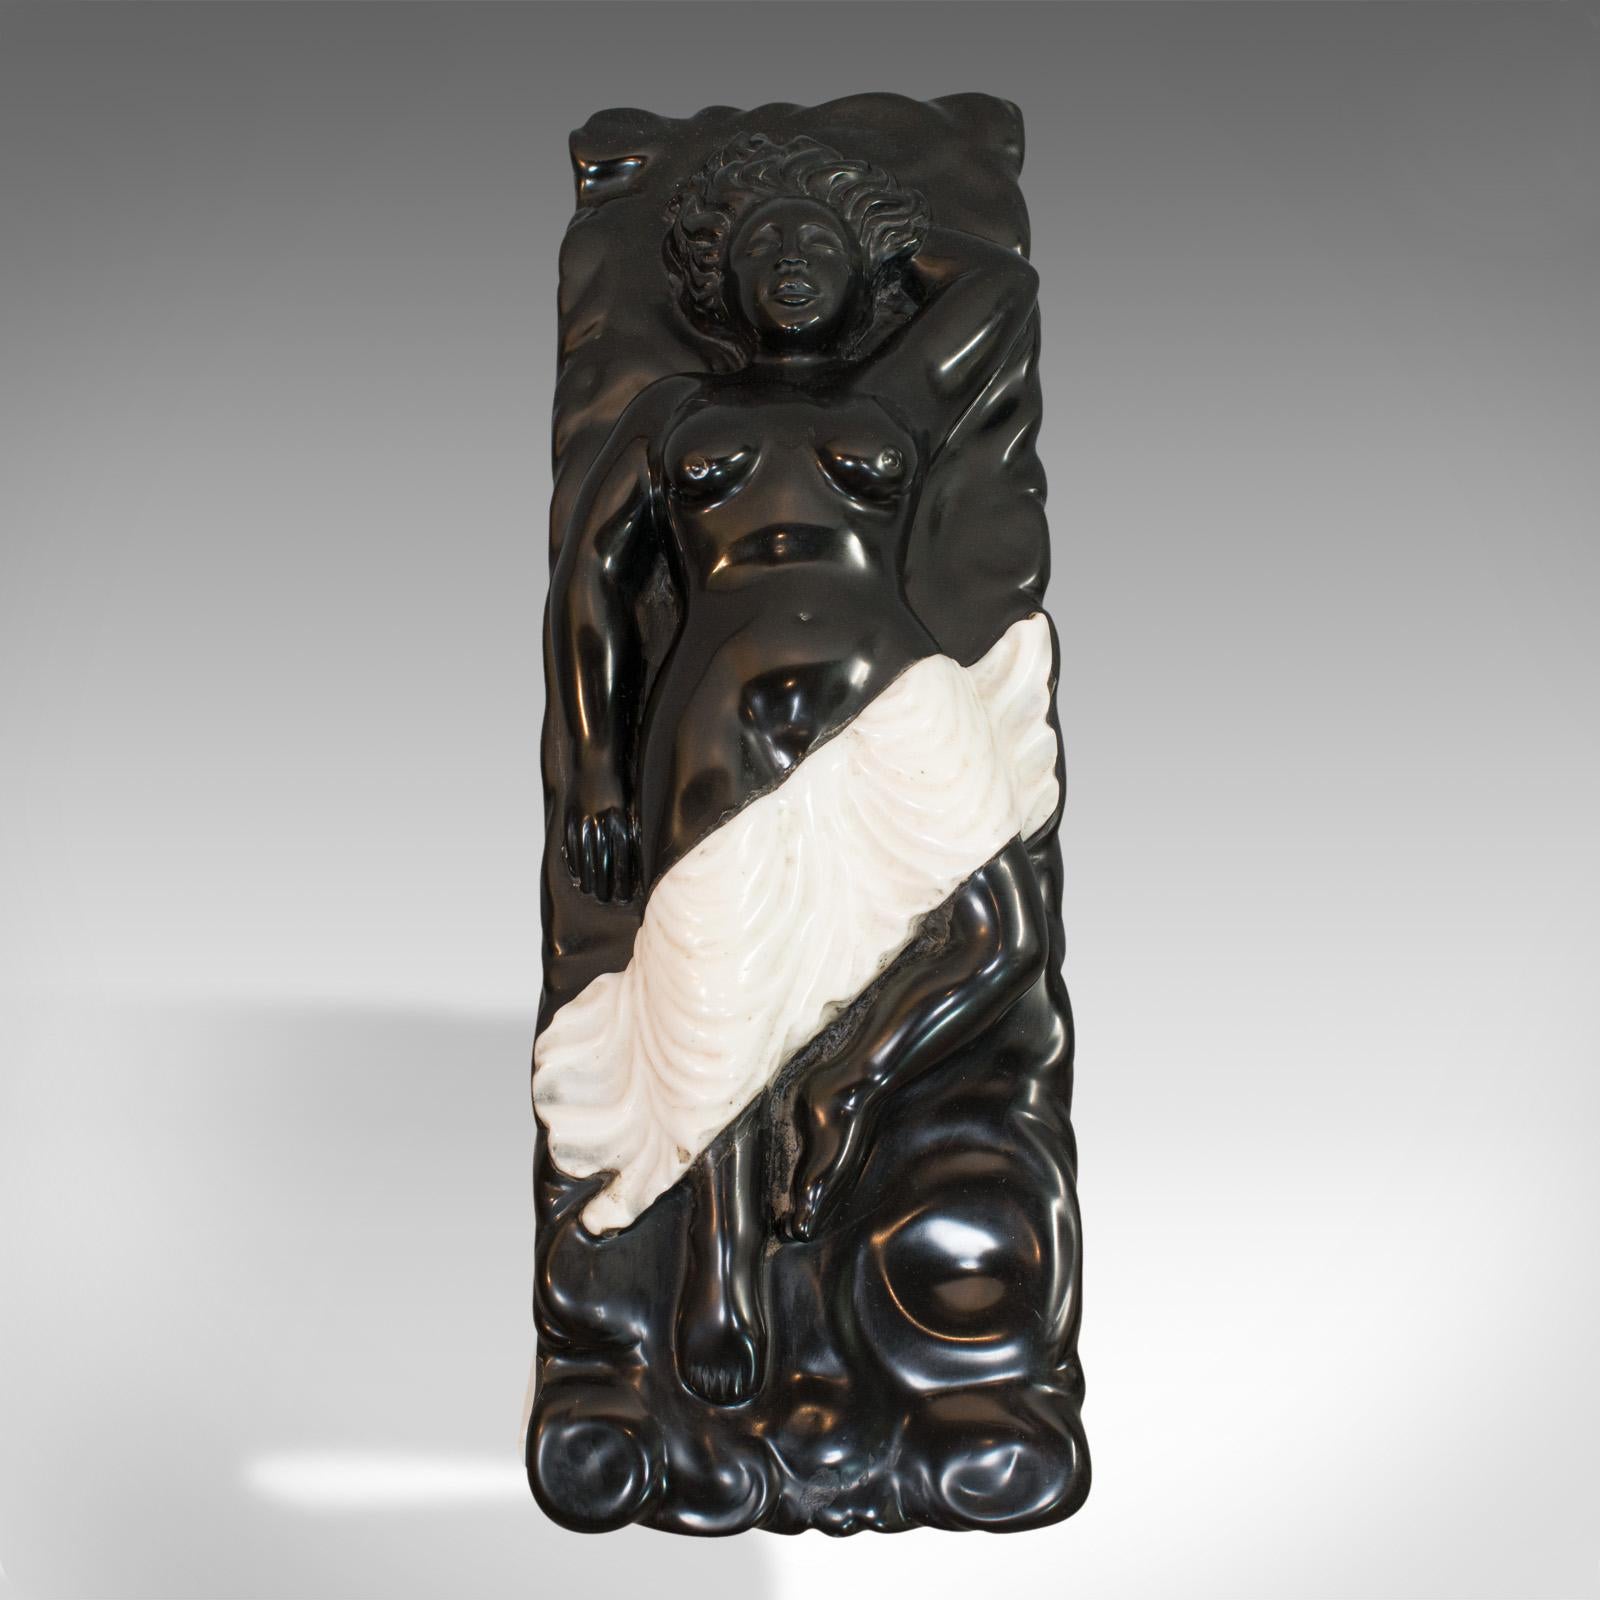 This is a vintage decorative sculpture. An English, marble female ornament by Dominic Hurley, dating to the late 20th century, circa 2000.

Displays a desirable aged patina
The spectacular result of hundreds of hours of craftsmanship
Hewn from a